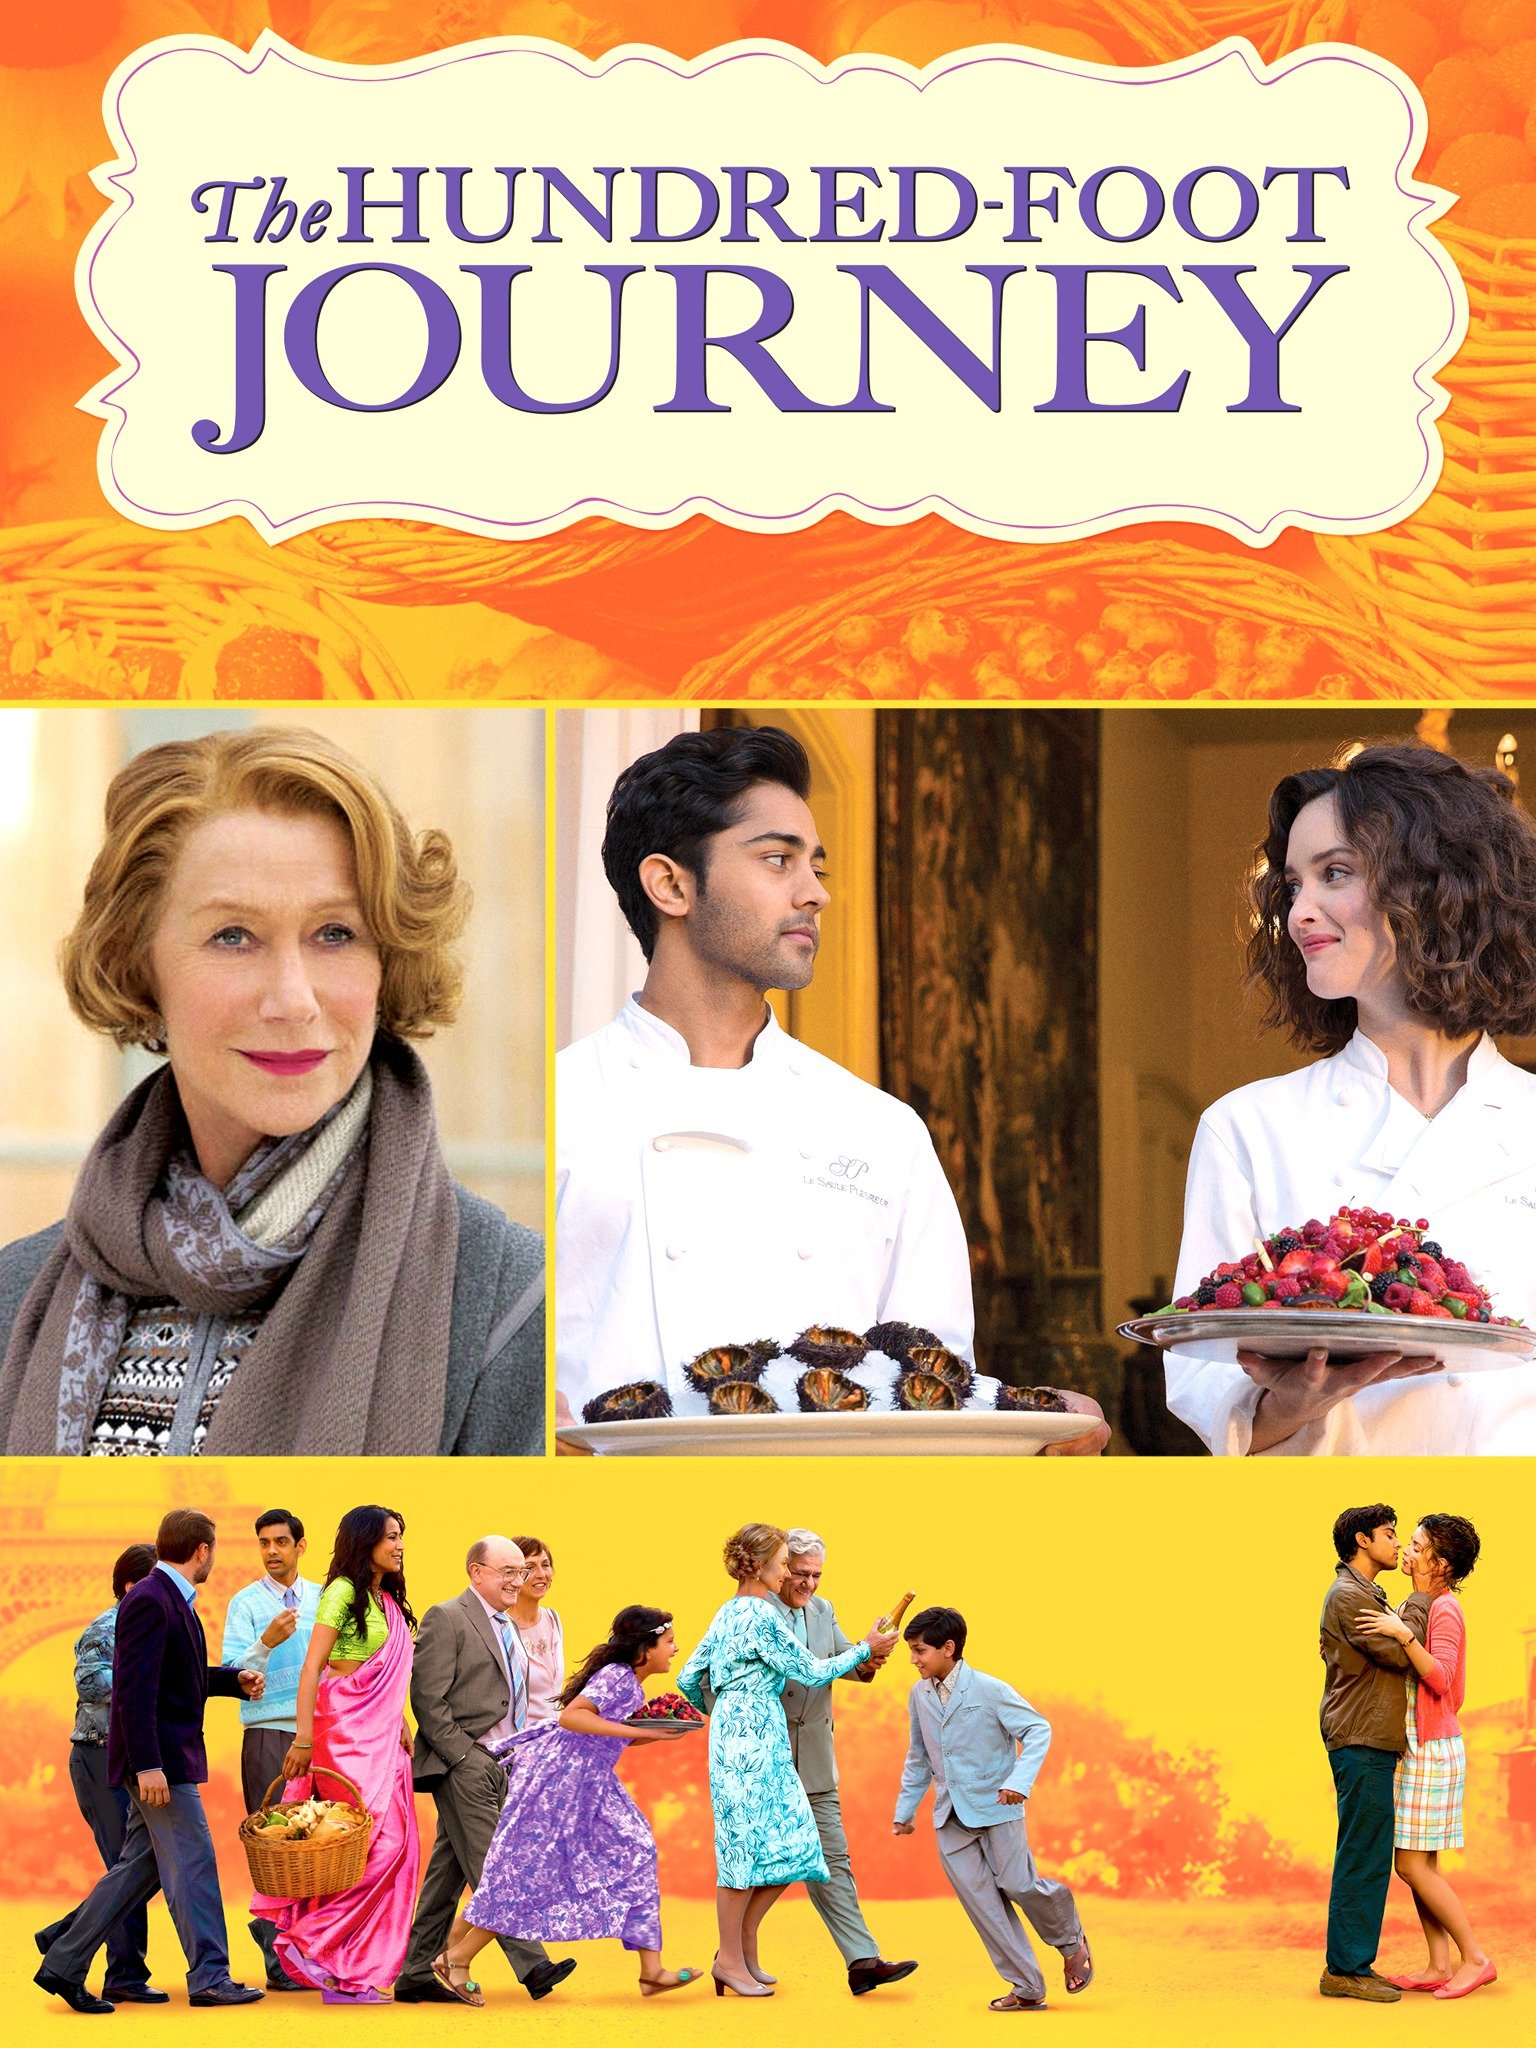 one hundred foot journey characters